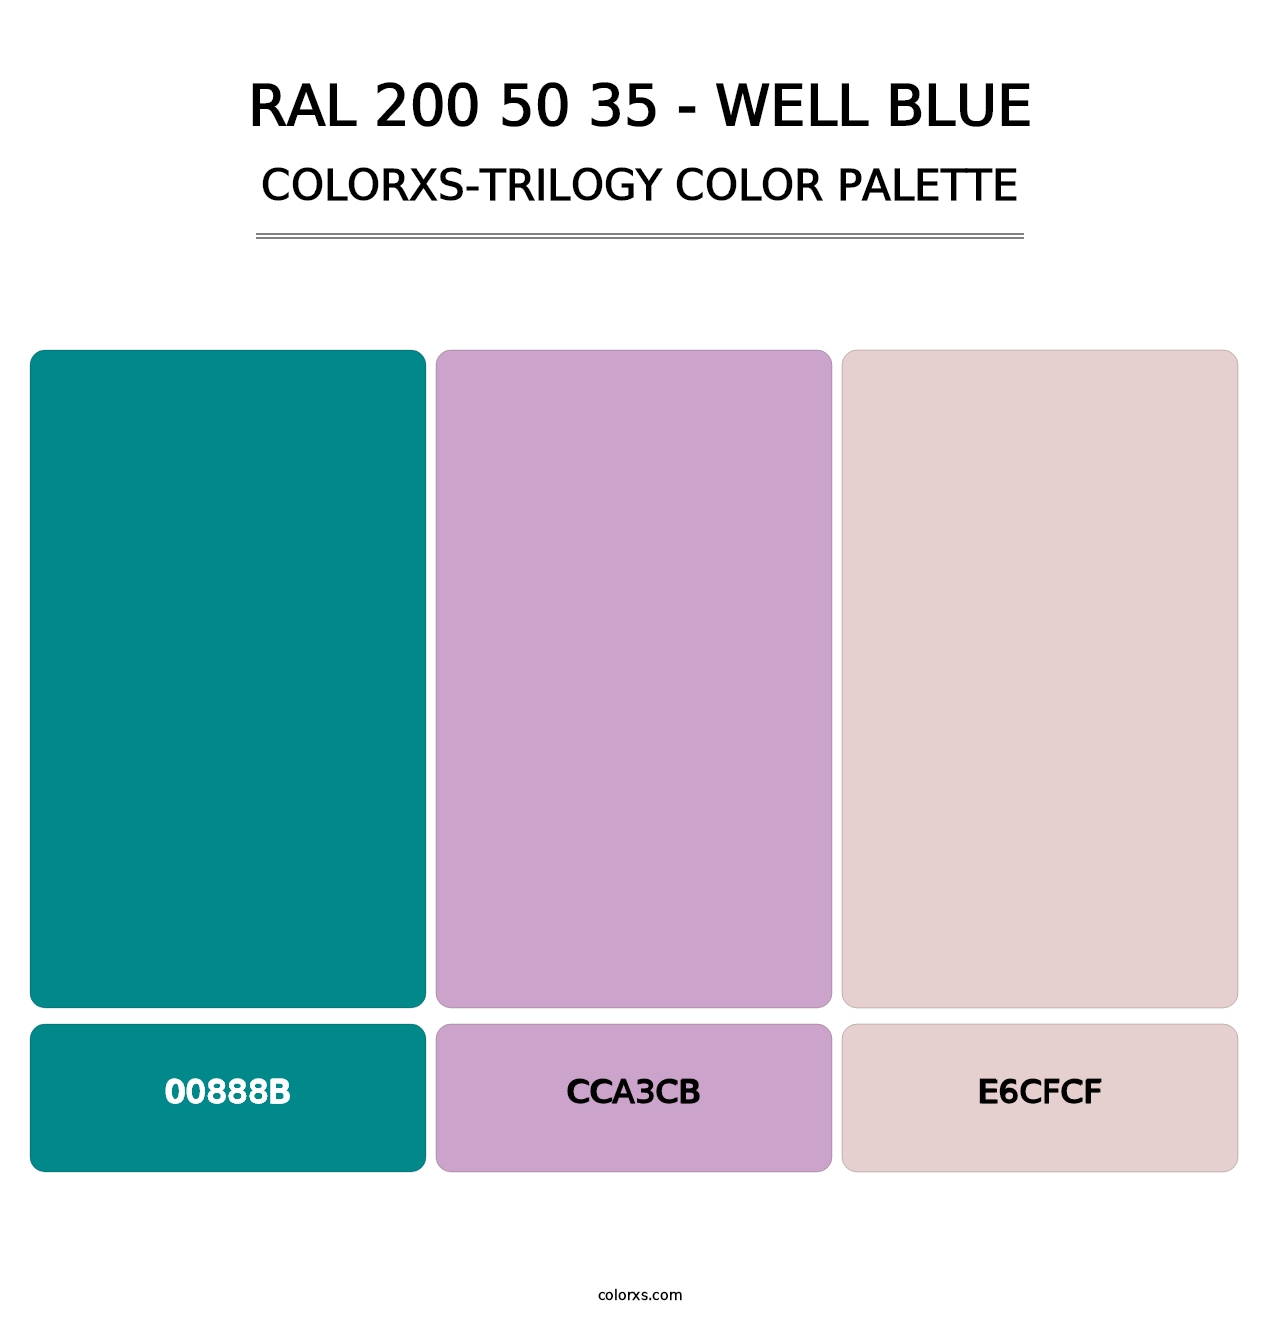 RAL 200 50 35 - Well Blue - Colorxs Trilogy Palette